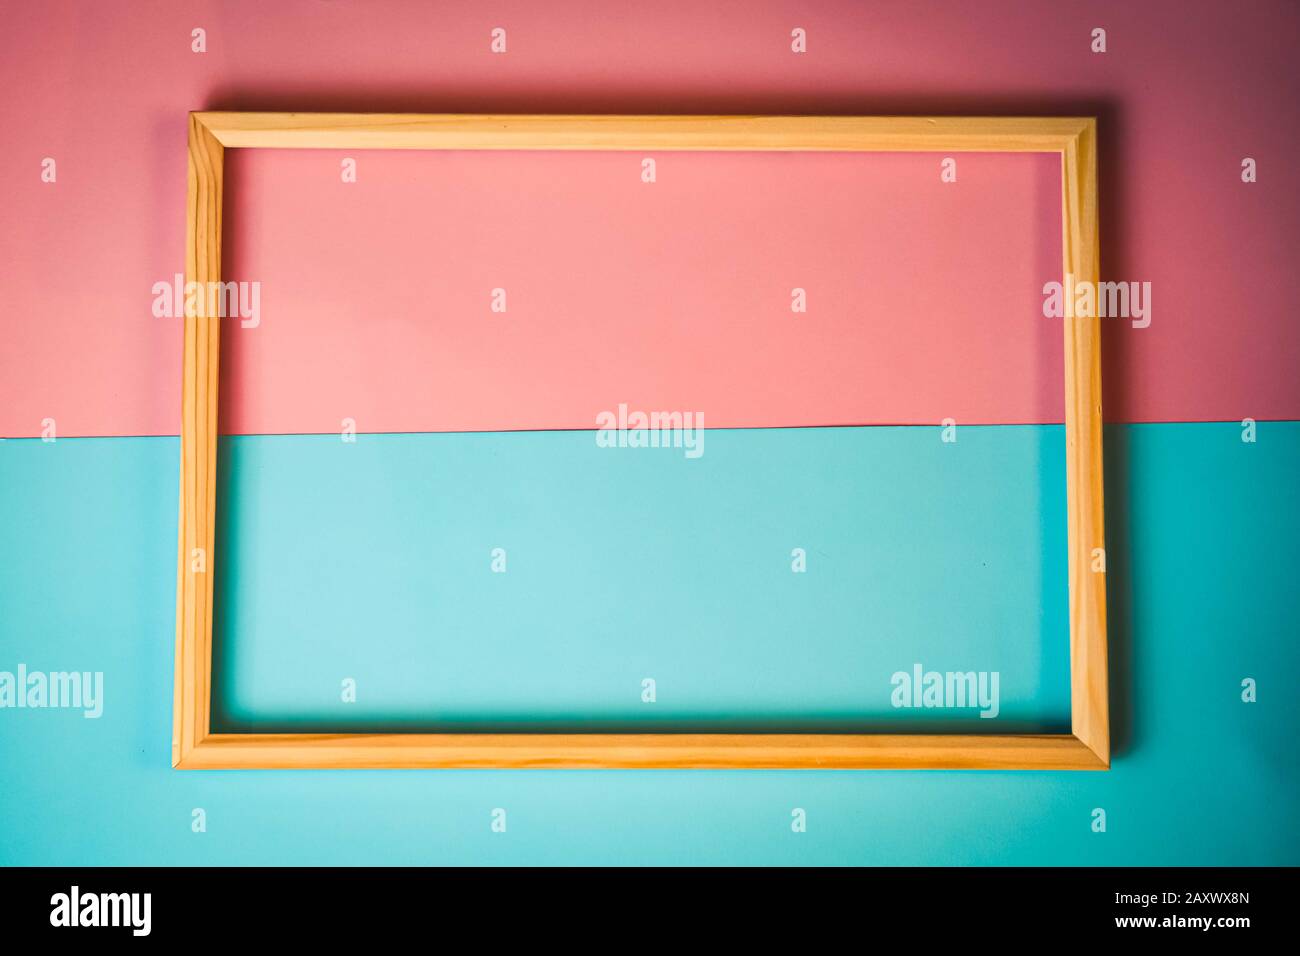 Abstract Geometric Colorful Paper Background. Color block concept. Stock Photo